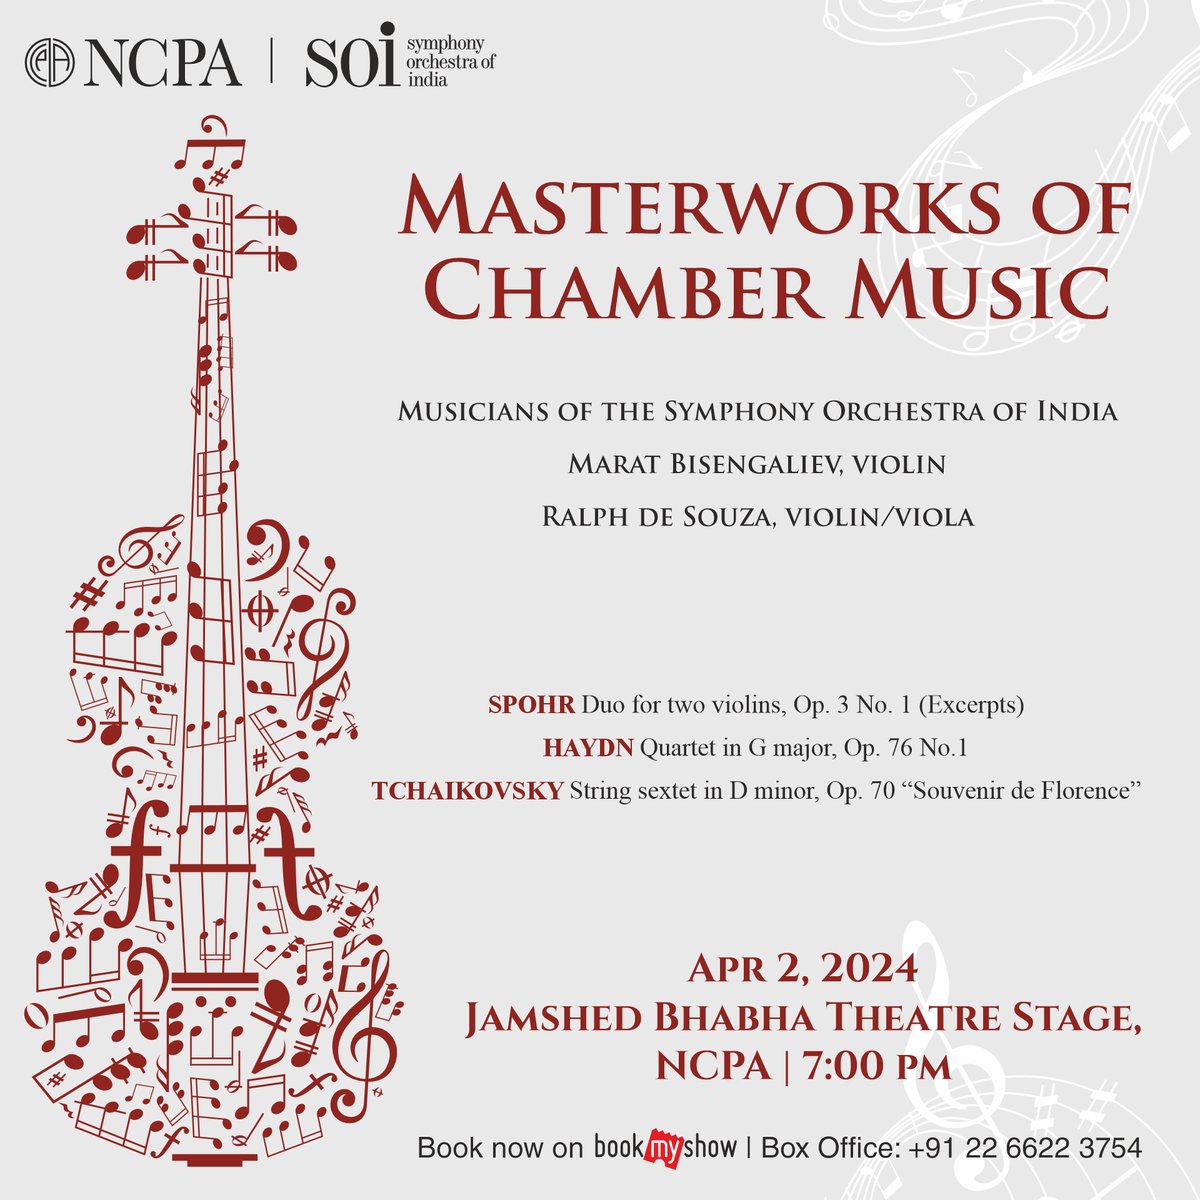 Virtuoso violinists Marat Bisengaliev & Ralph de Souza join the talented musicians of the SOI with mesmerizing chamber music by Spohr, Haydn and Tchaikovsky Book now on go.ncpamumbai.com/qUQXyW 🎫 Masterworks of Chamber Music 📅 Apr 2 ⏰ 7:00 pm 📍 Jamshed Bhabha Theatre Stage